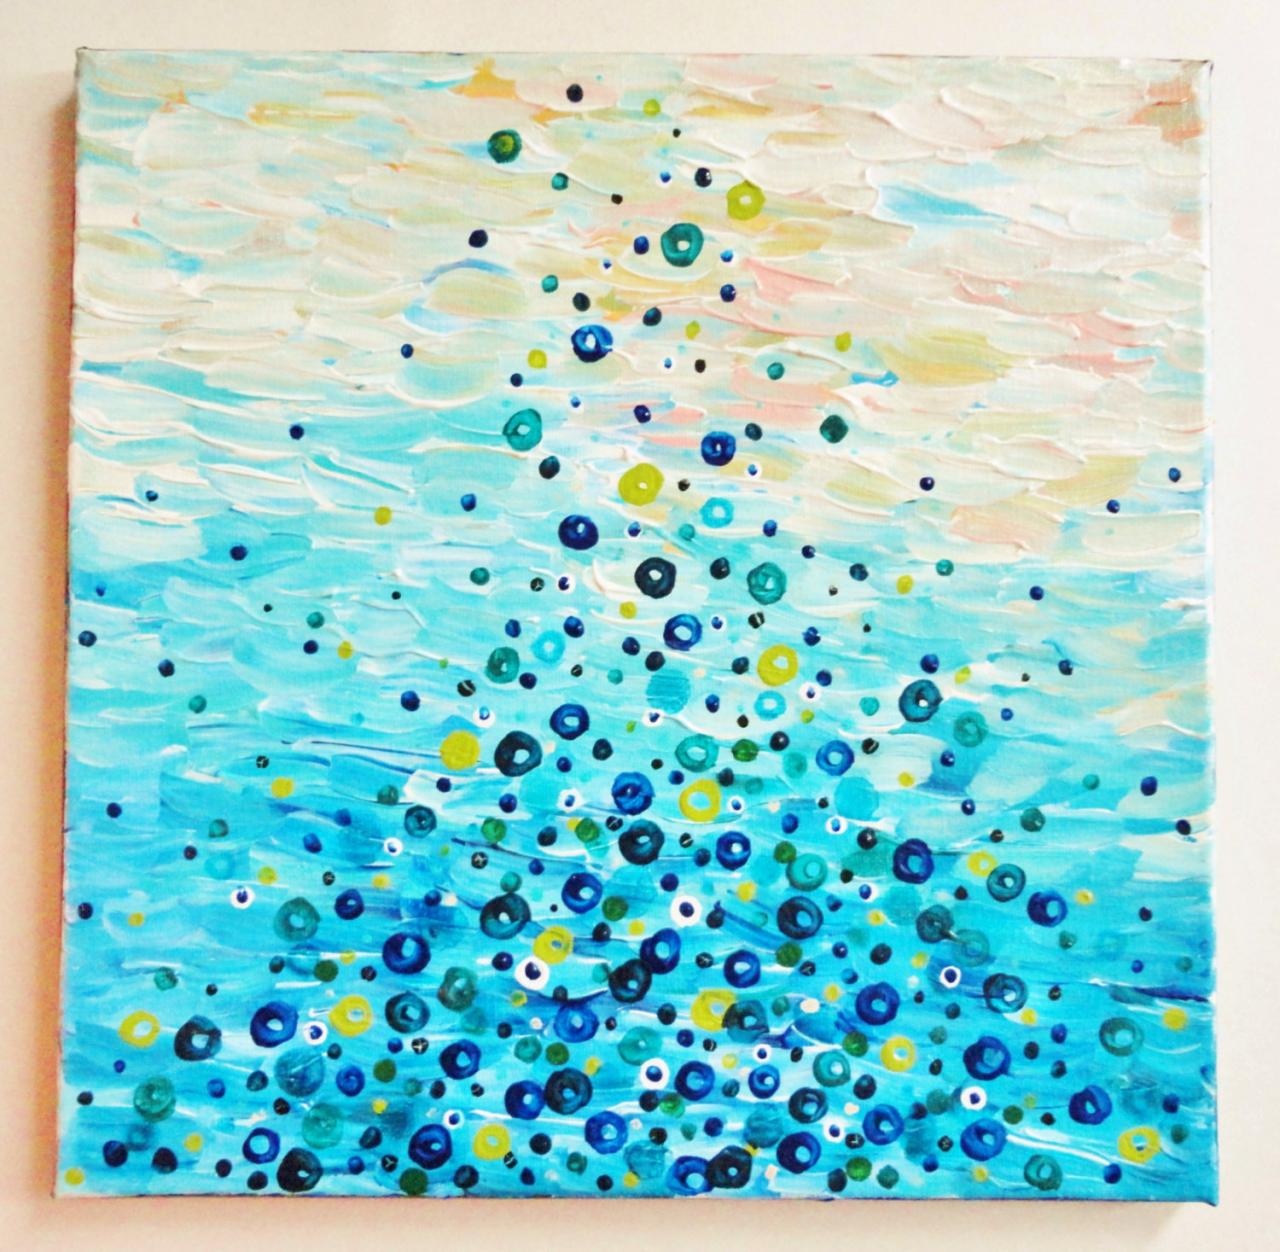 What Goes Up - Lovely Original Abstract Acrylic Painting 12 X 12 Turquoise Blue And Peach Tones, Colorful Royal Blue Bubbles, Fine Art Decor